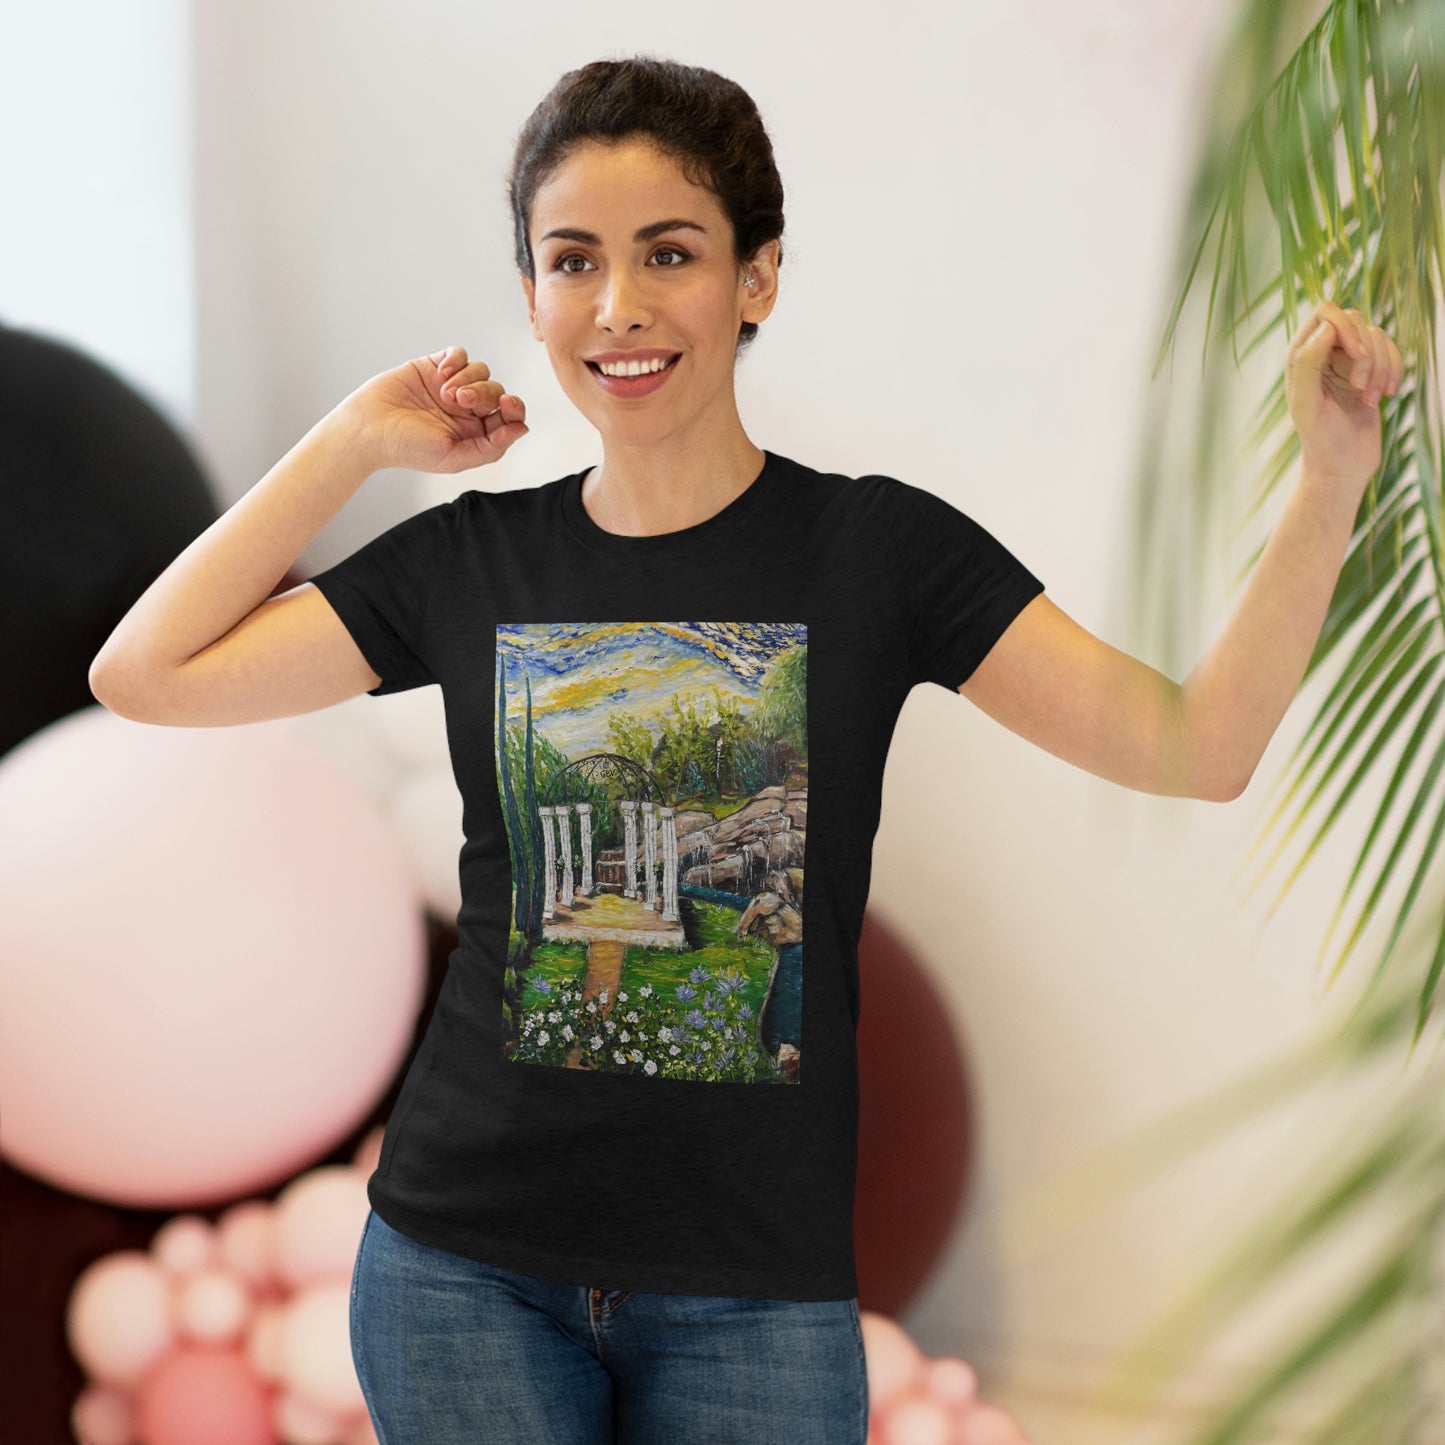 The Pergola at GBV Temecula Women's fitted Triblend Tee  tee shirt